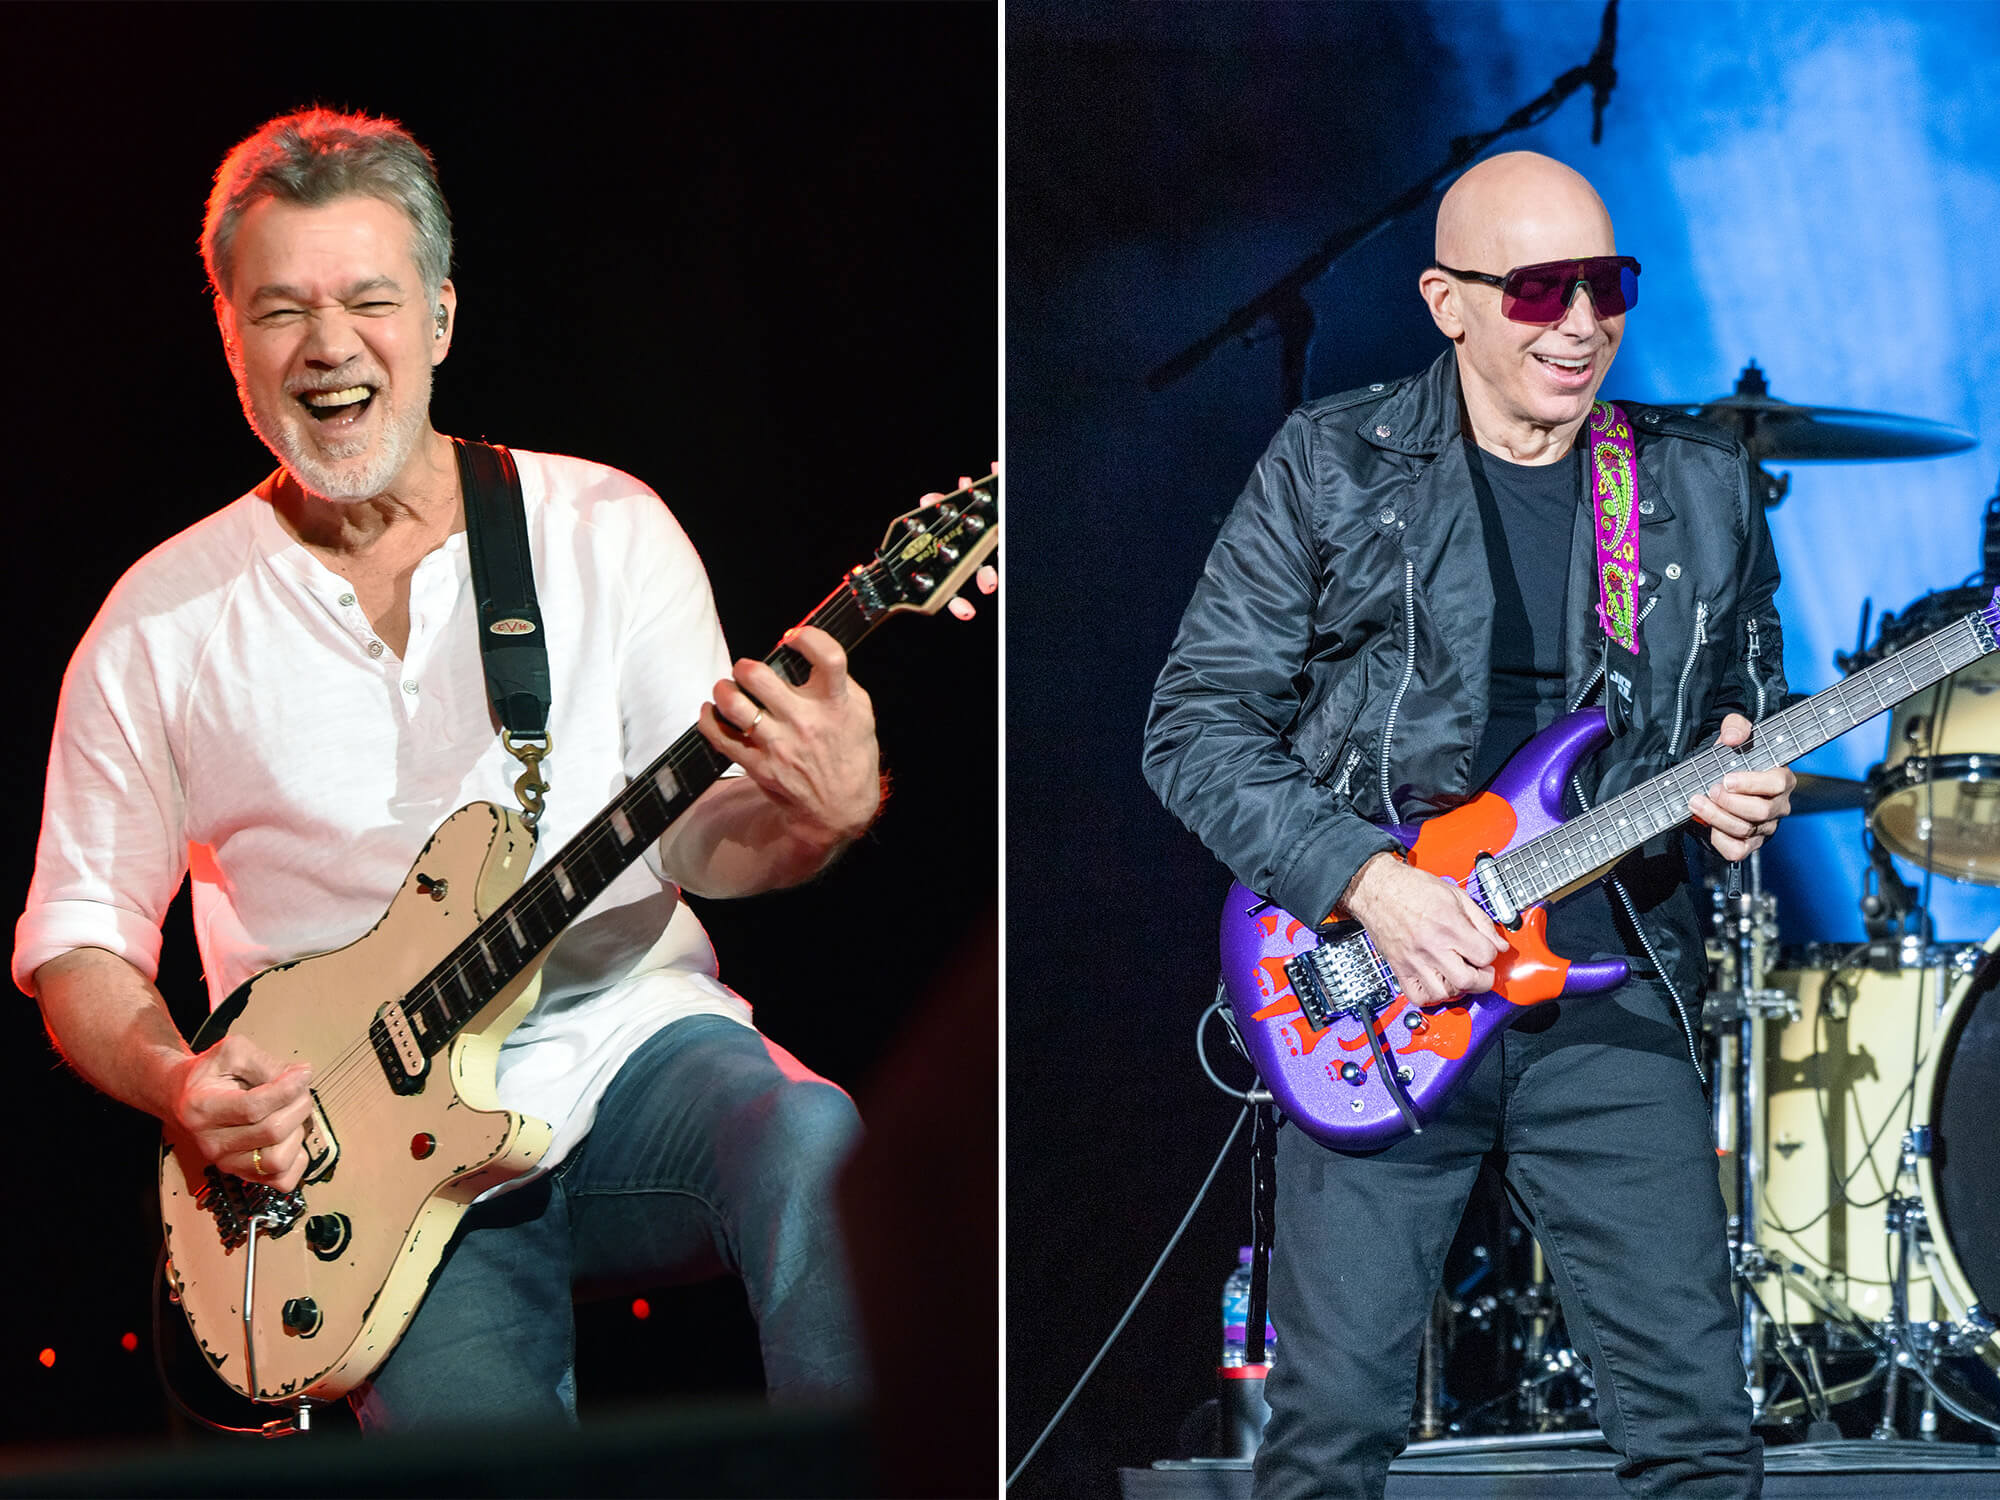 Eddie Van Halen (left) and Joe Satriani (right). Both are playing guitars, with big smiles on their faces.